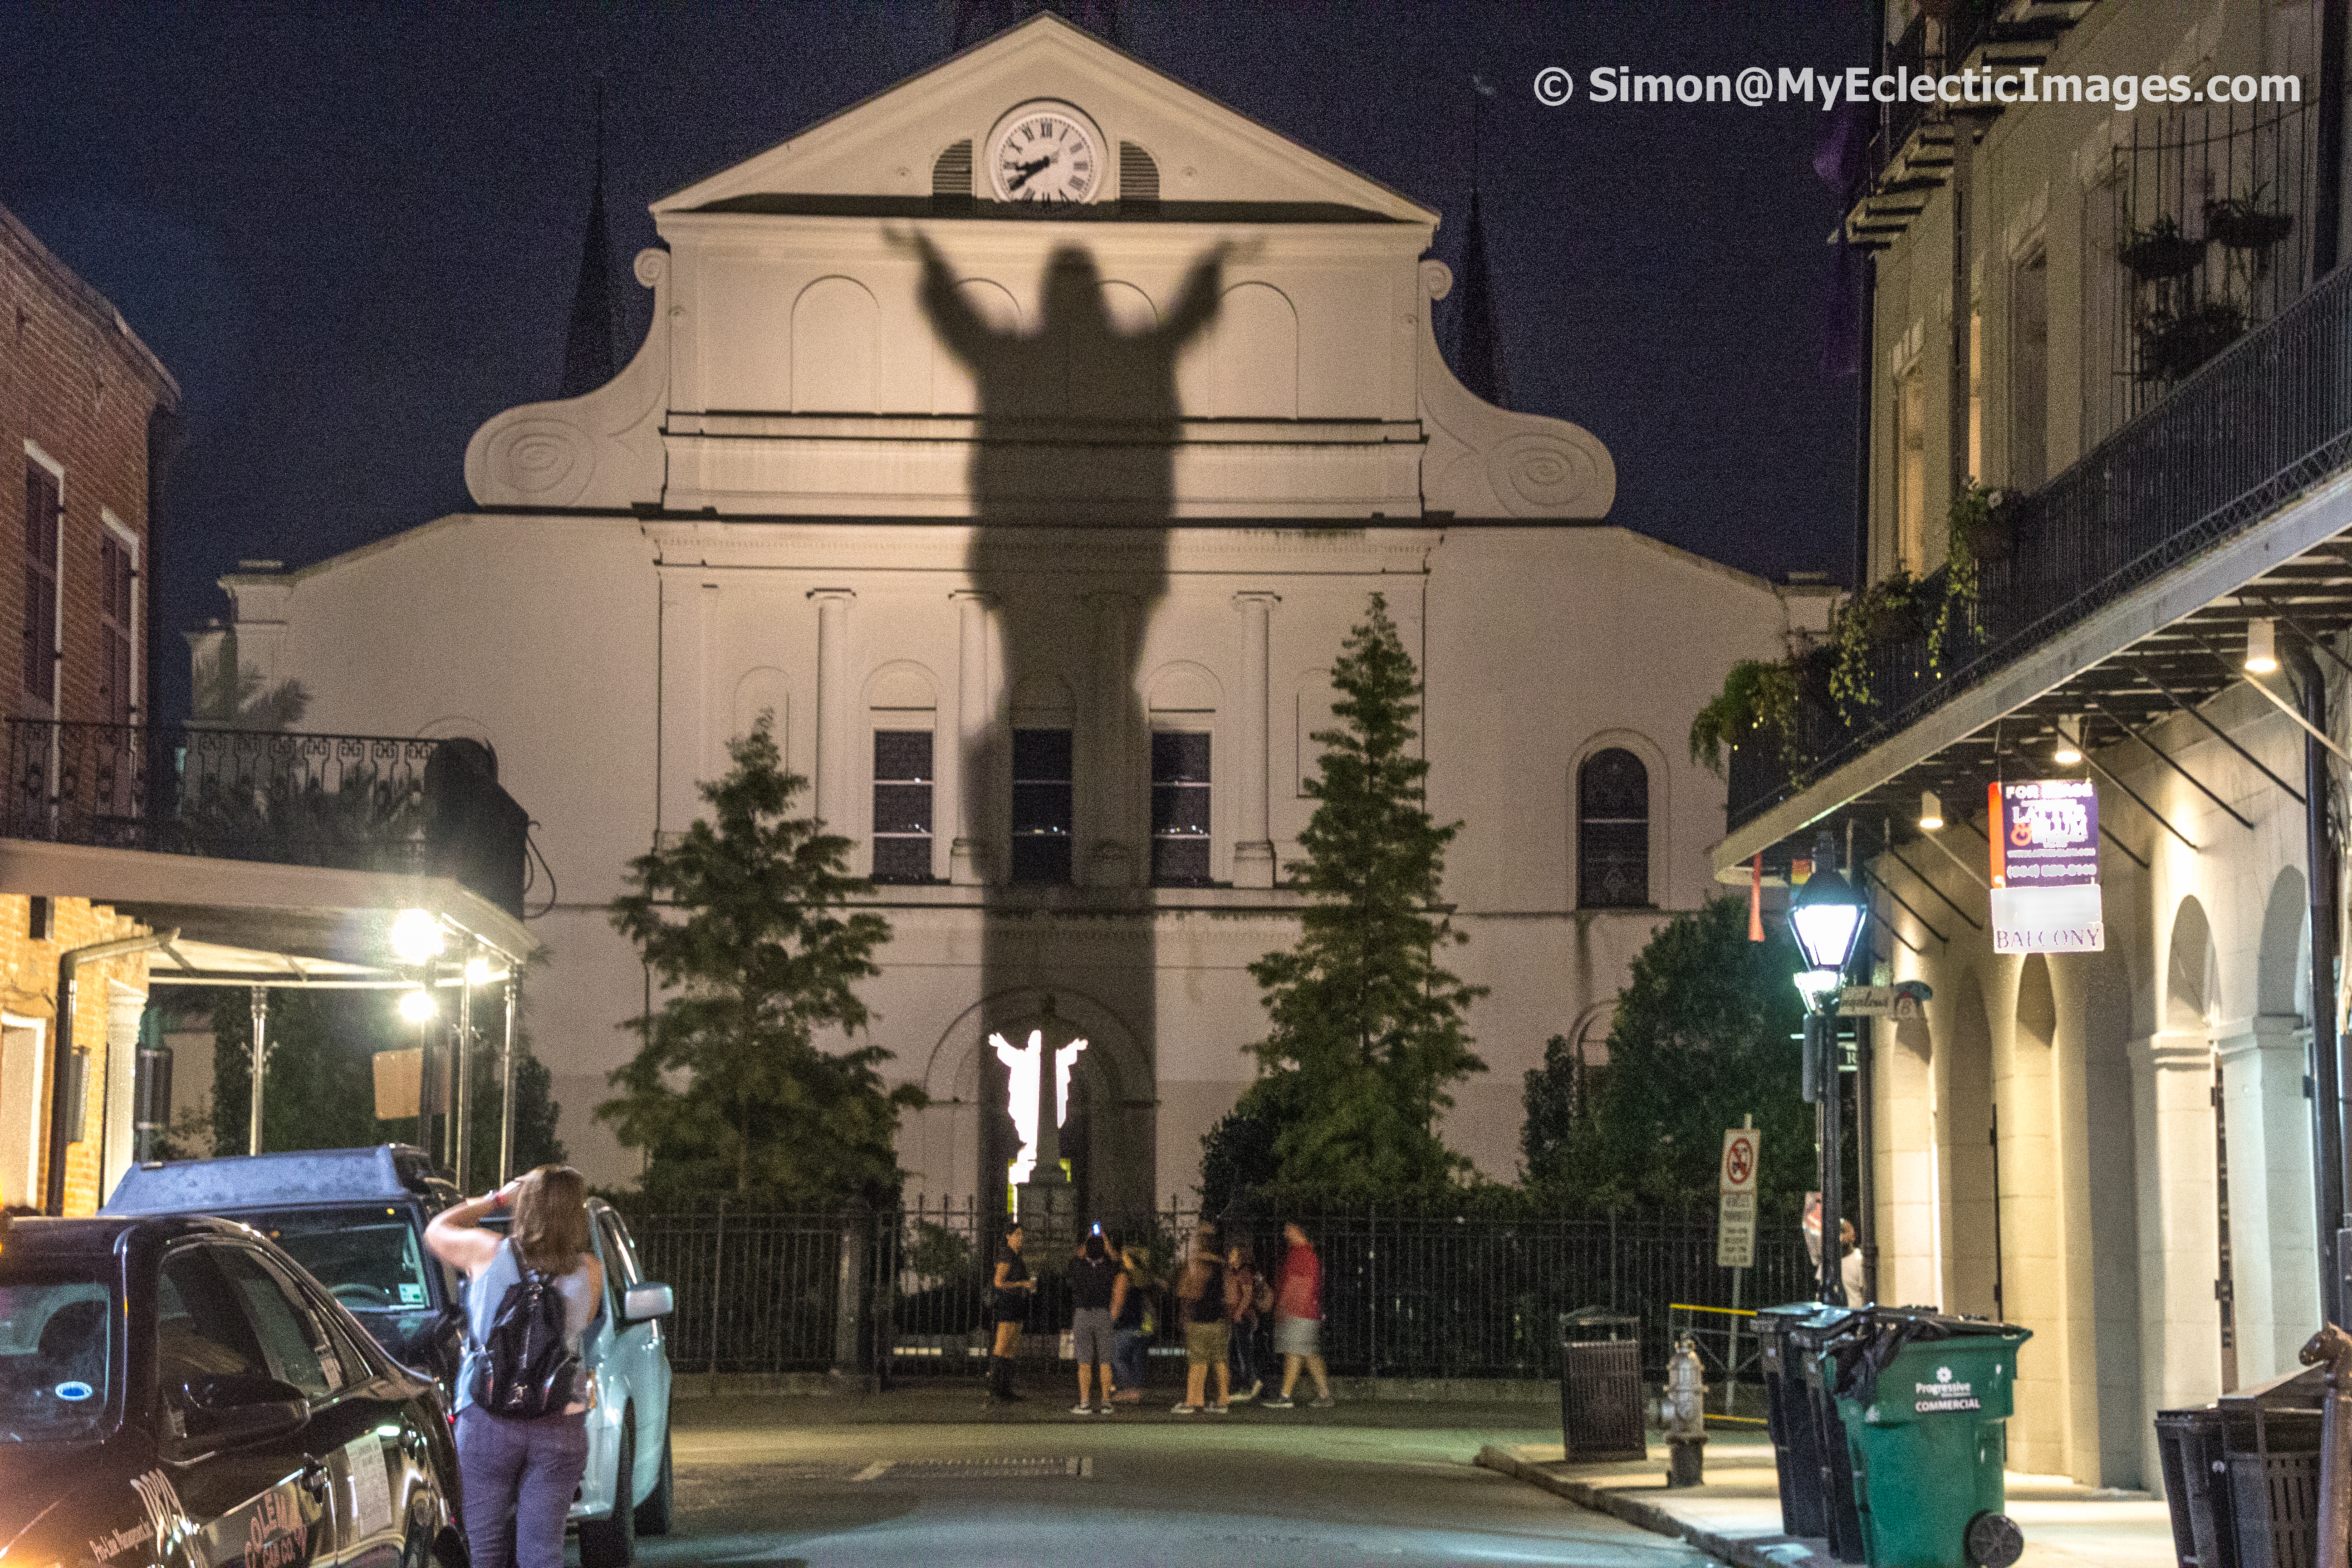 The Image of Christ Projected on Cathedral Wall in Haunted New Orleans